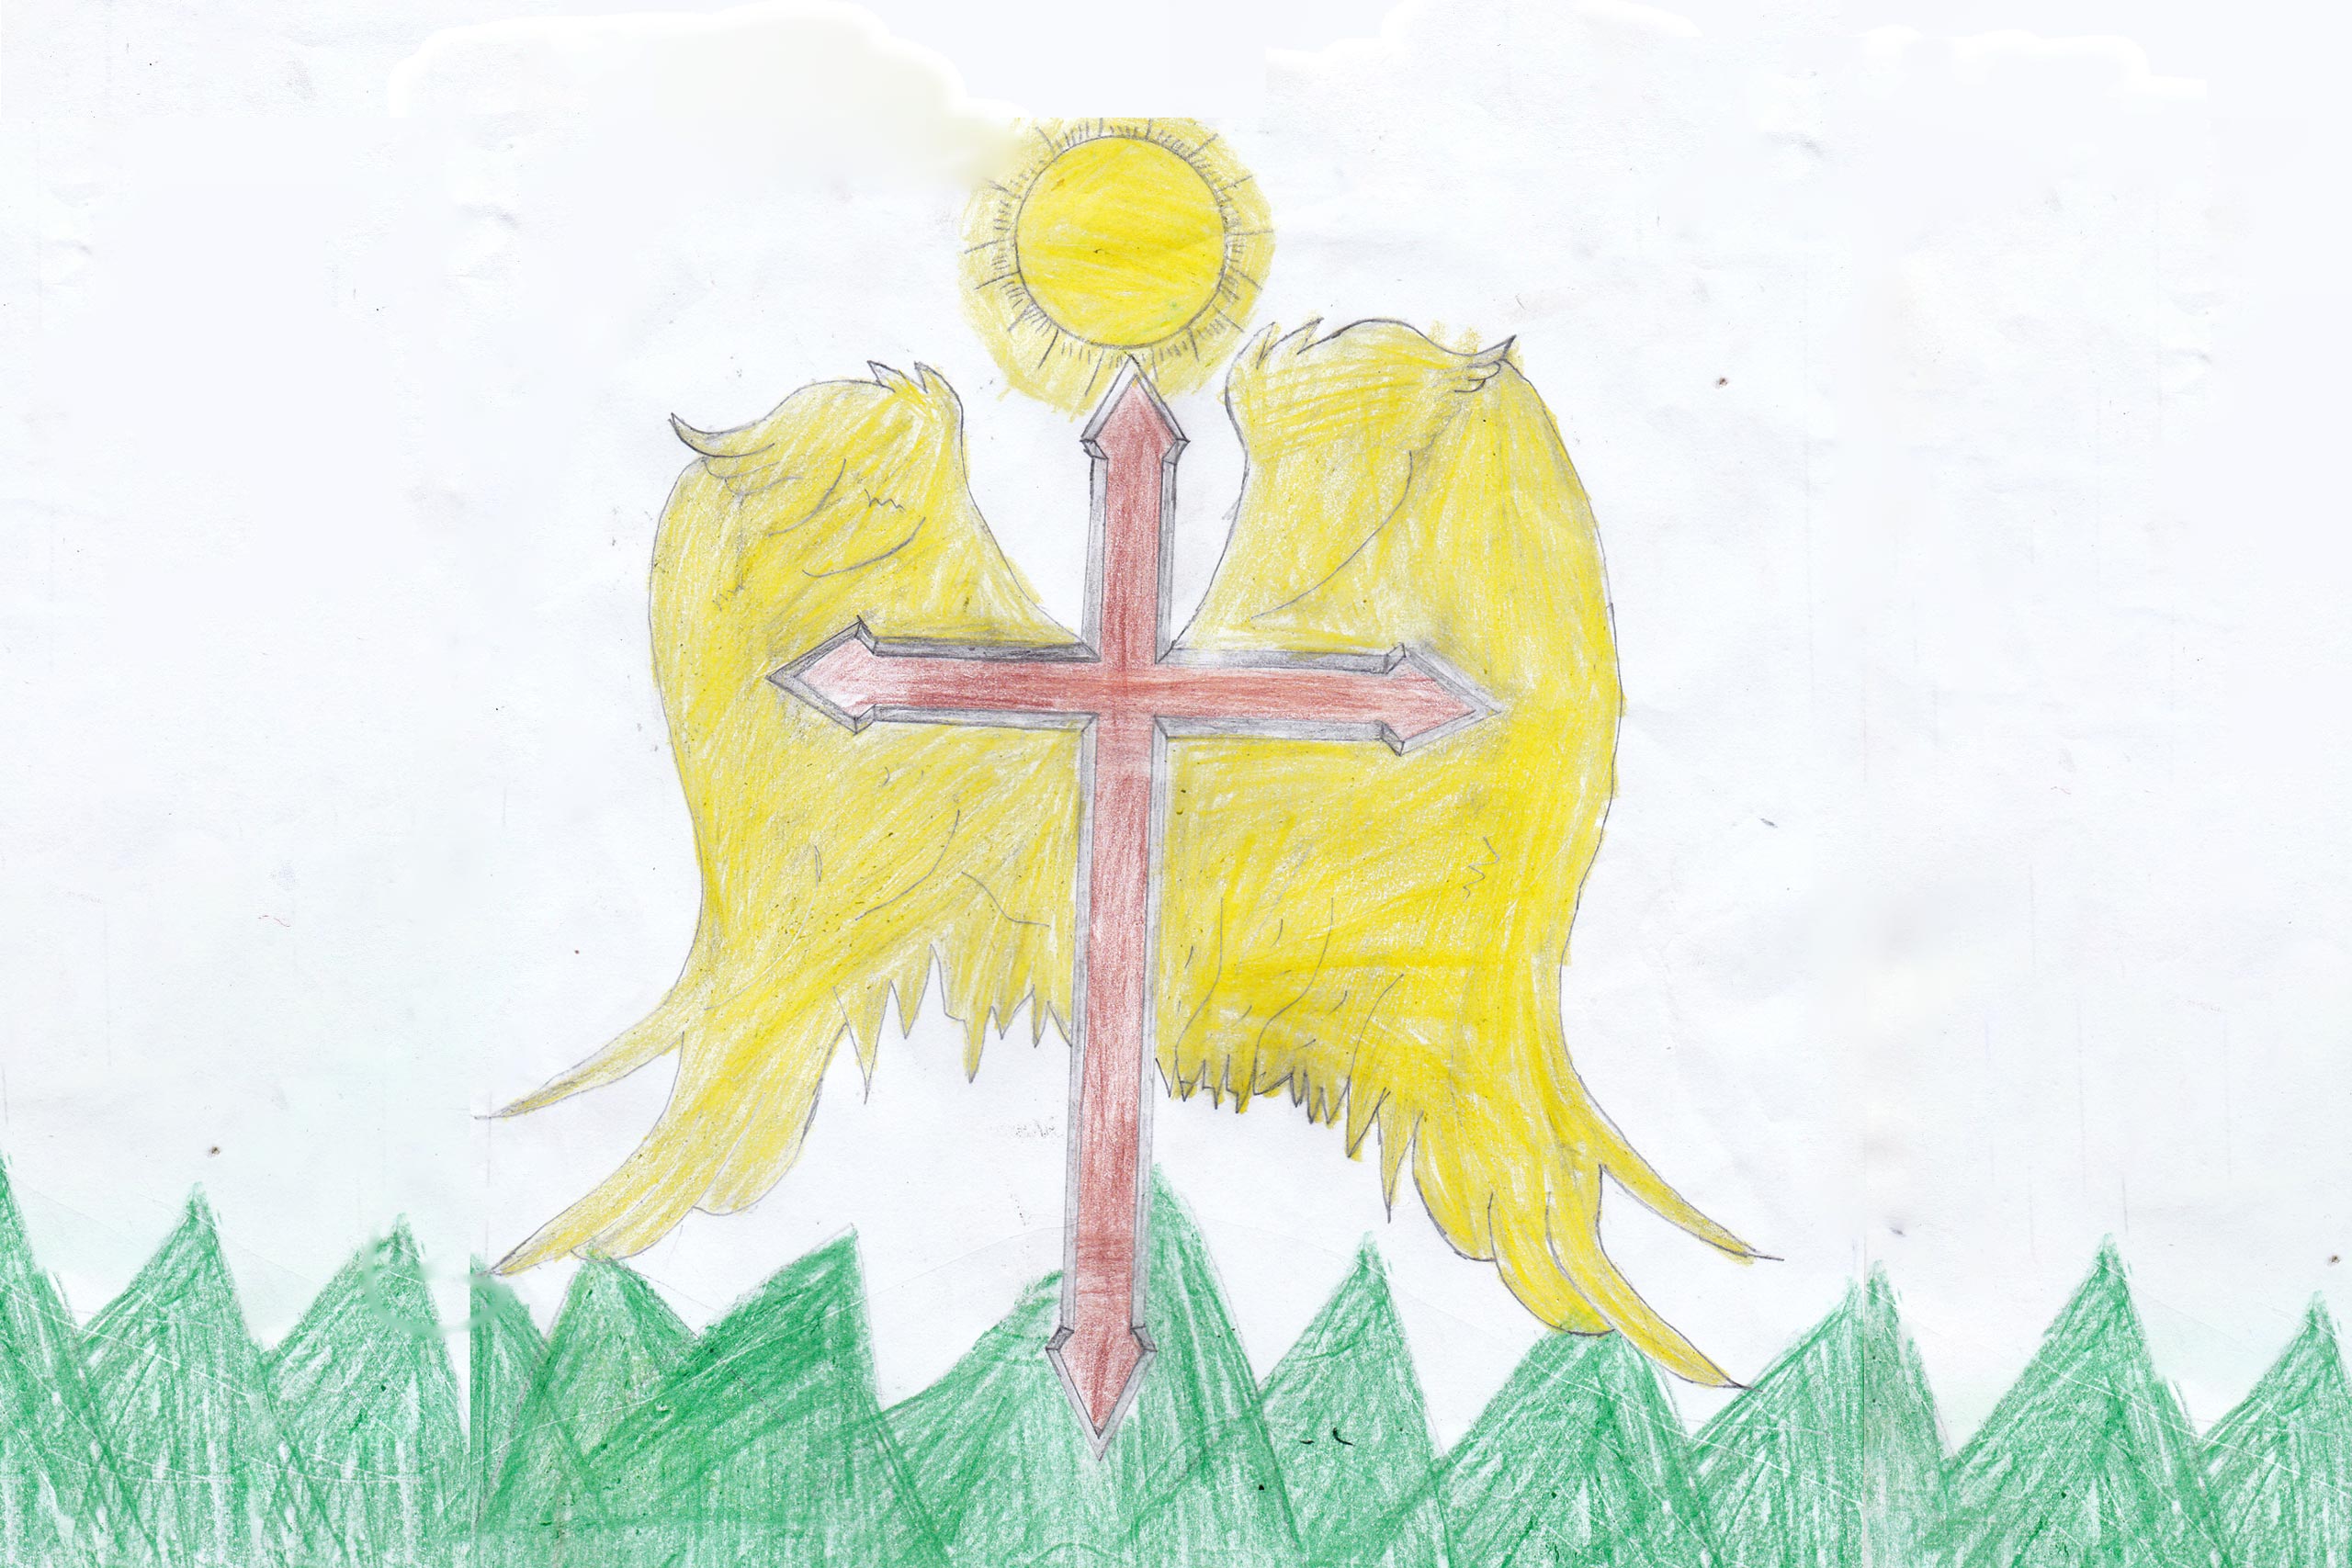 child's drawing of an angel